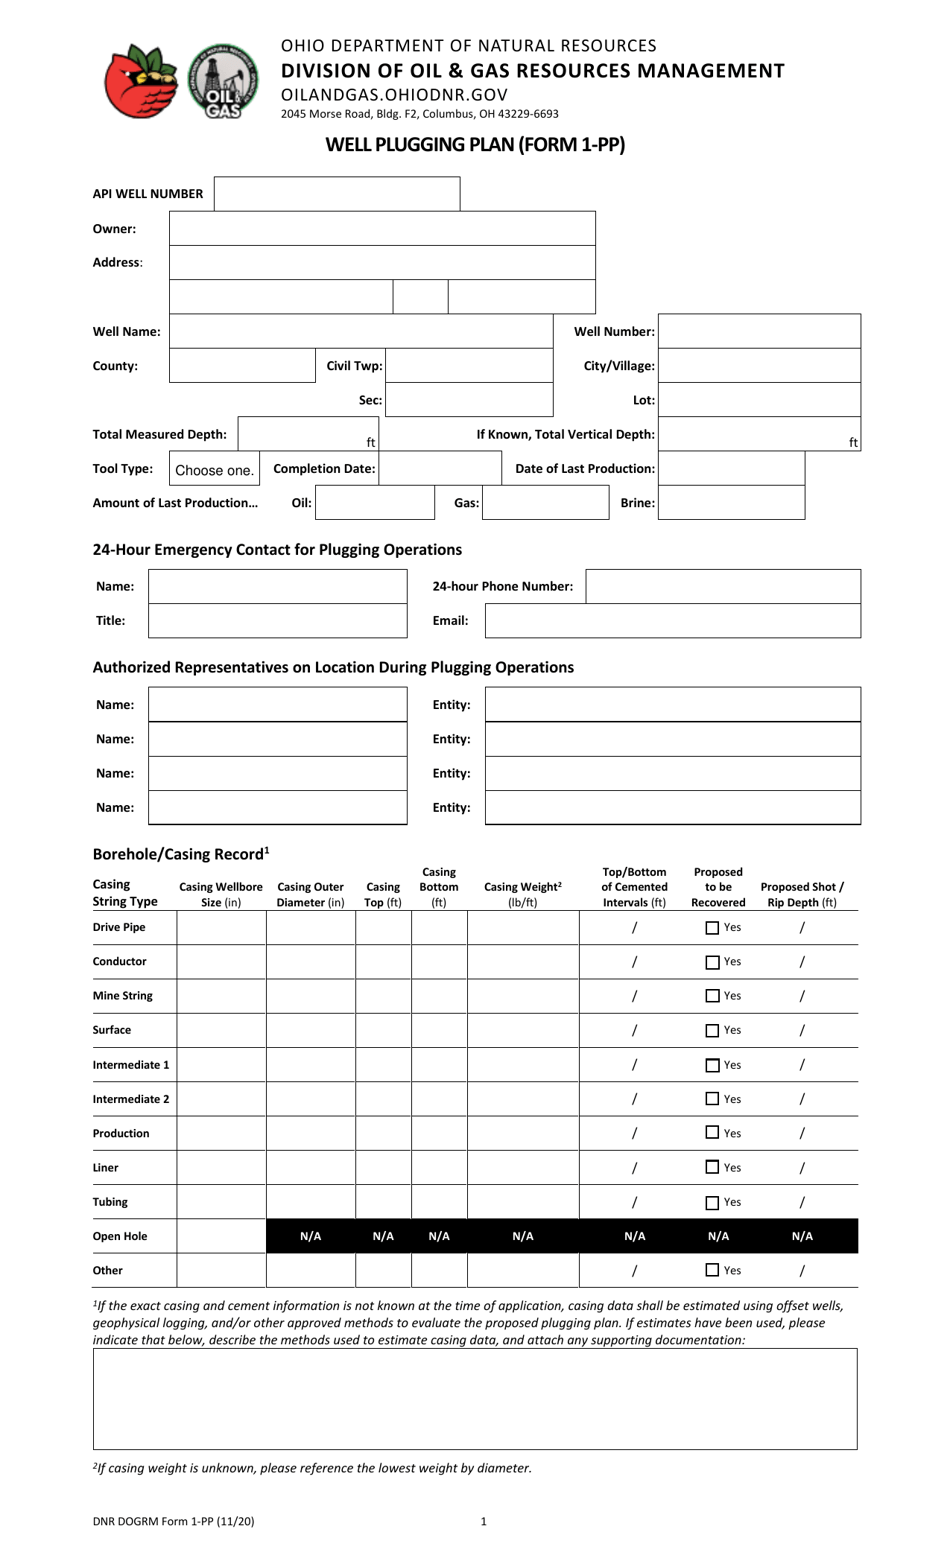 Form 1-PP Well Plugging Plan - Ohio, Page 1